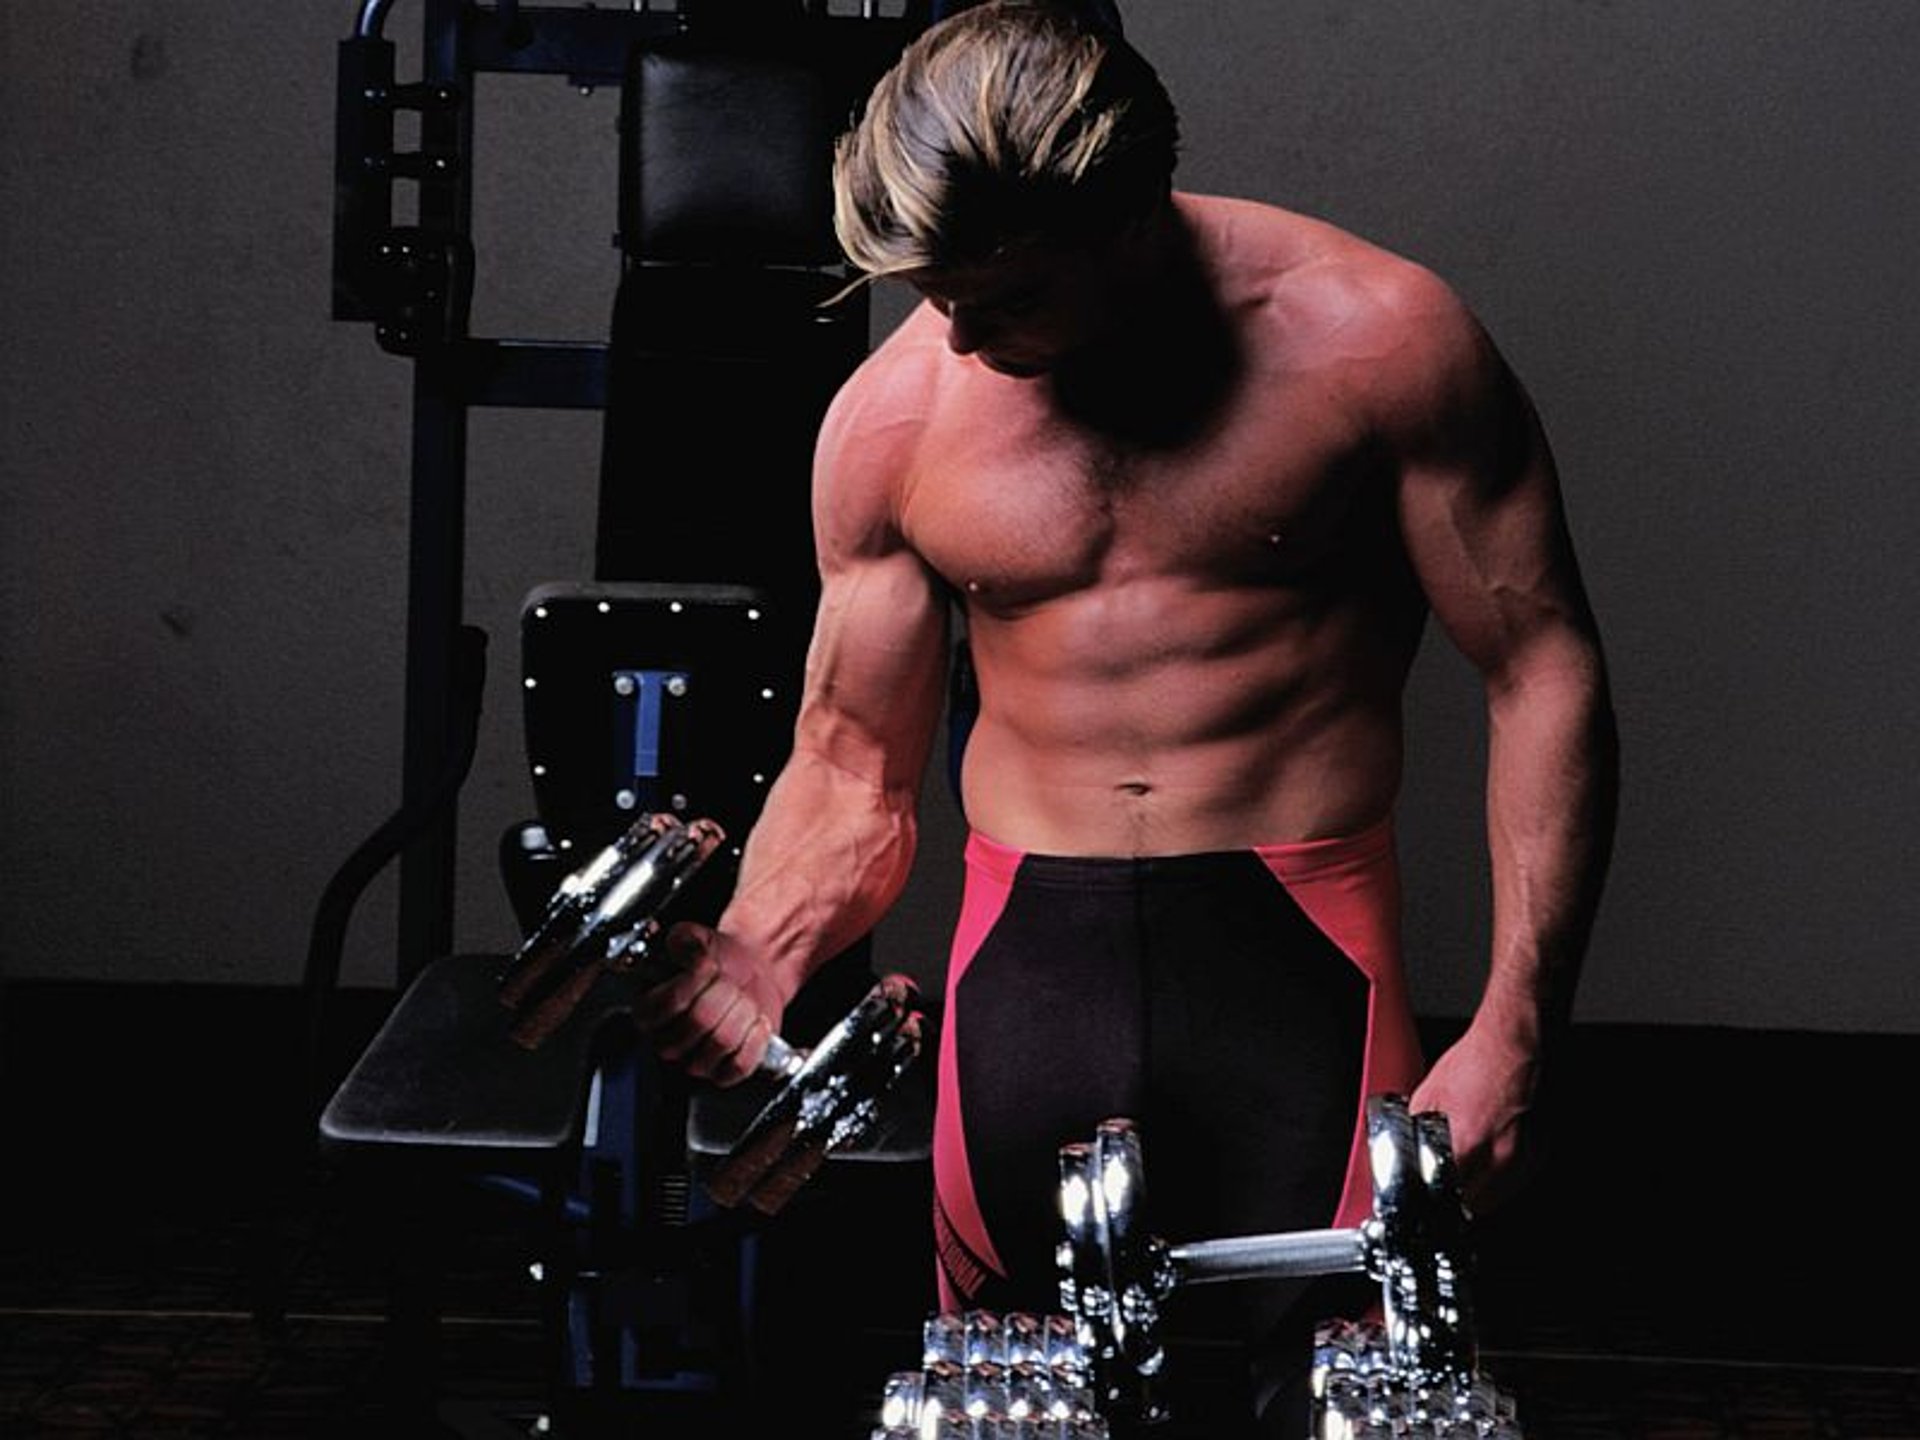 body building without steroids: Is Not That Difficult As You Think